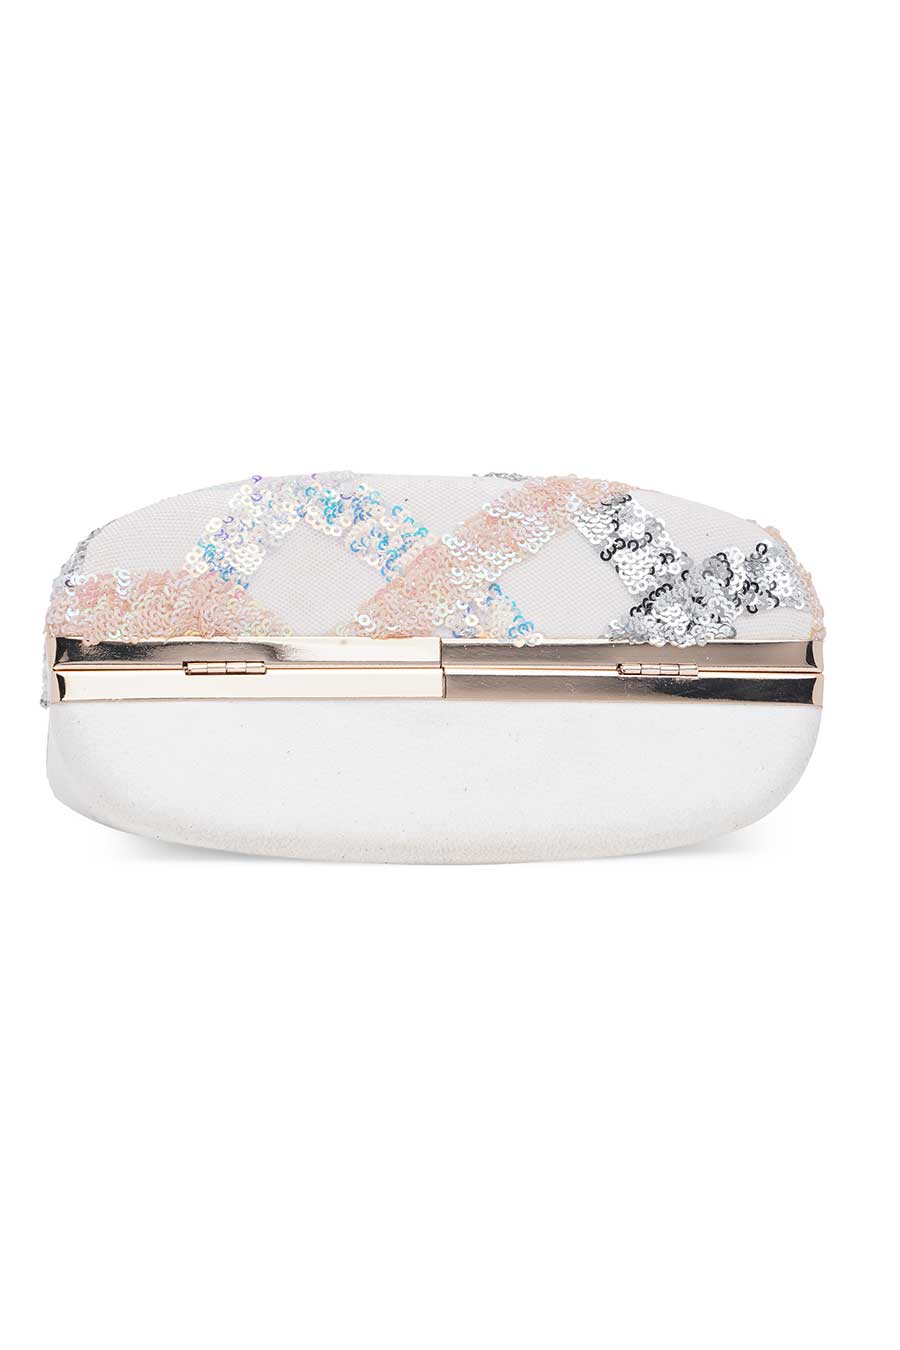 White Embroidered Purse Style Clutch